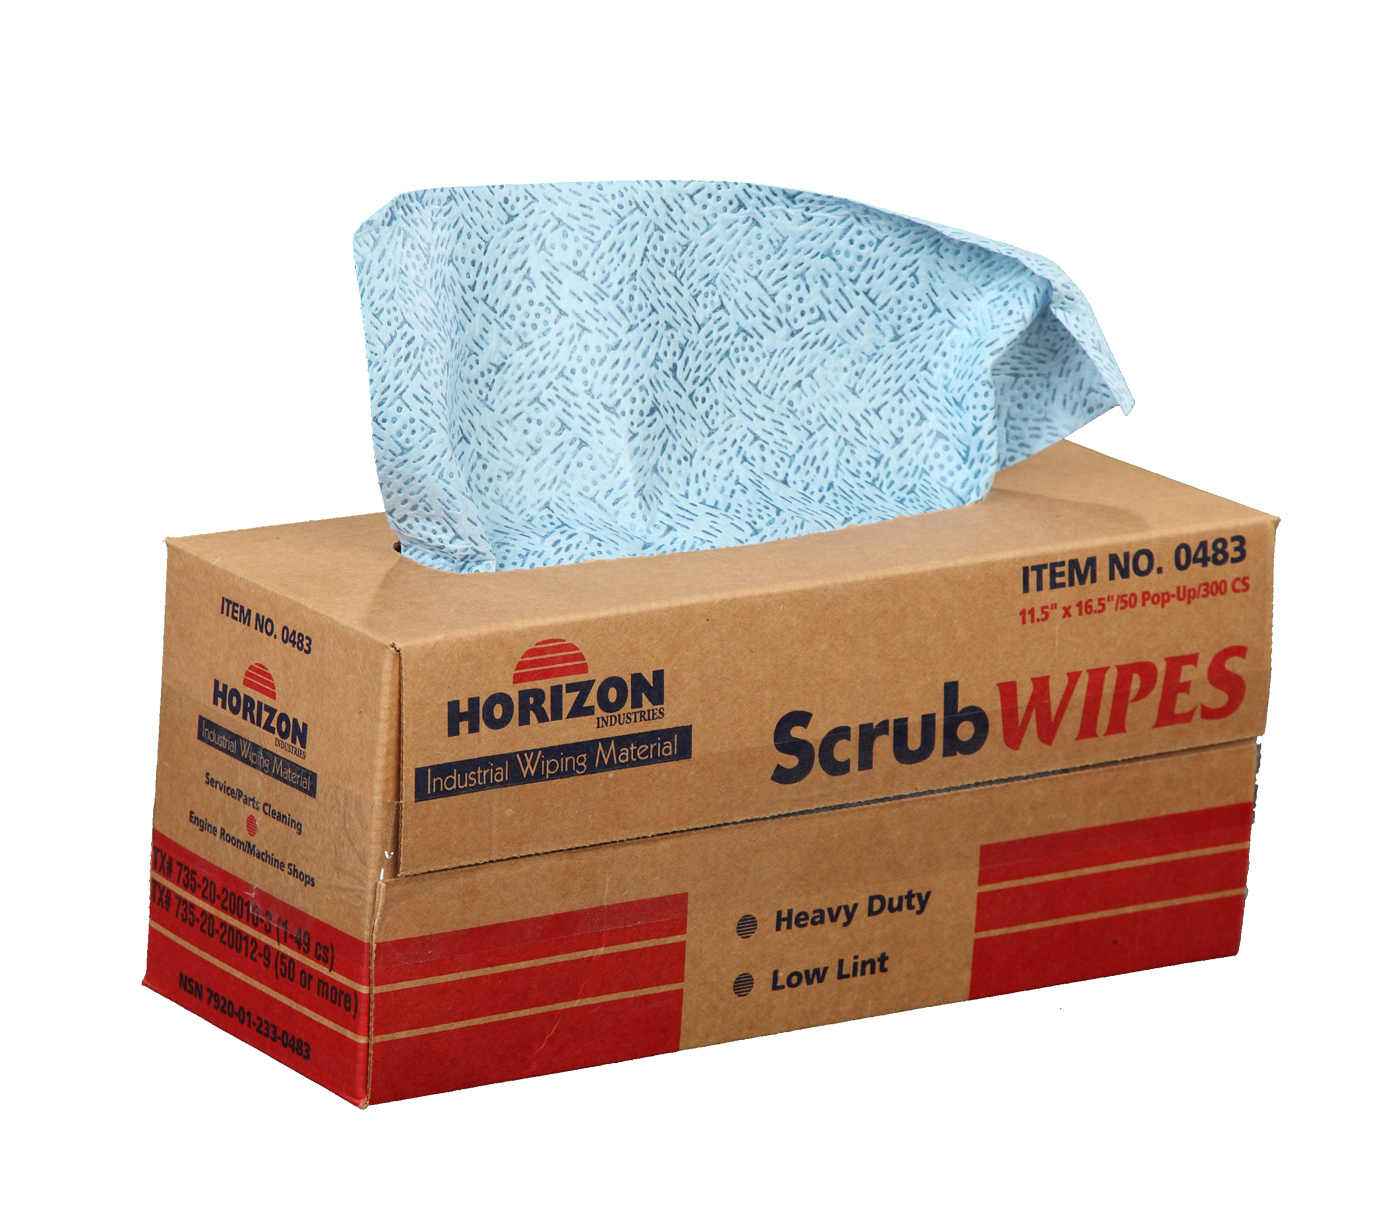 Cleaning Wet Wipes – Northfork Chemicals